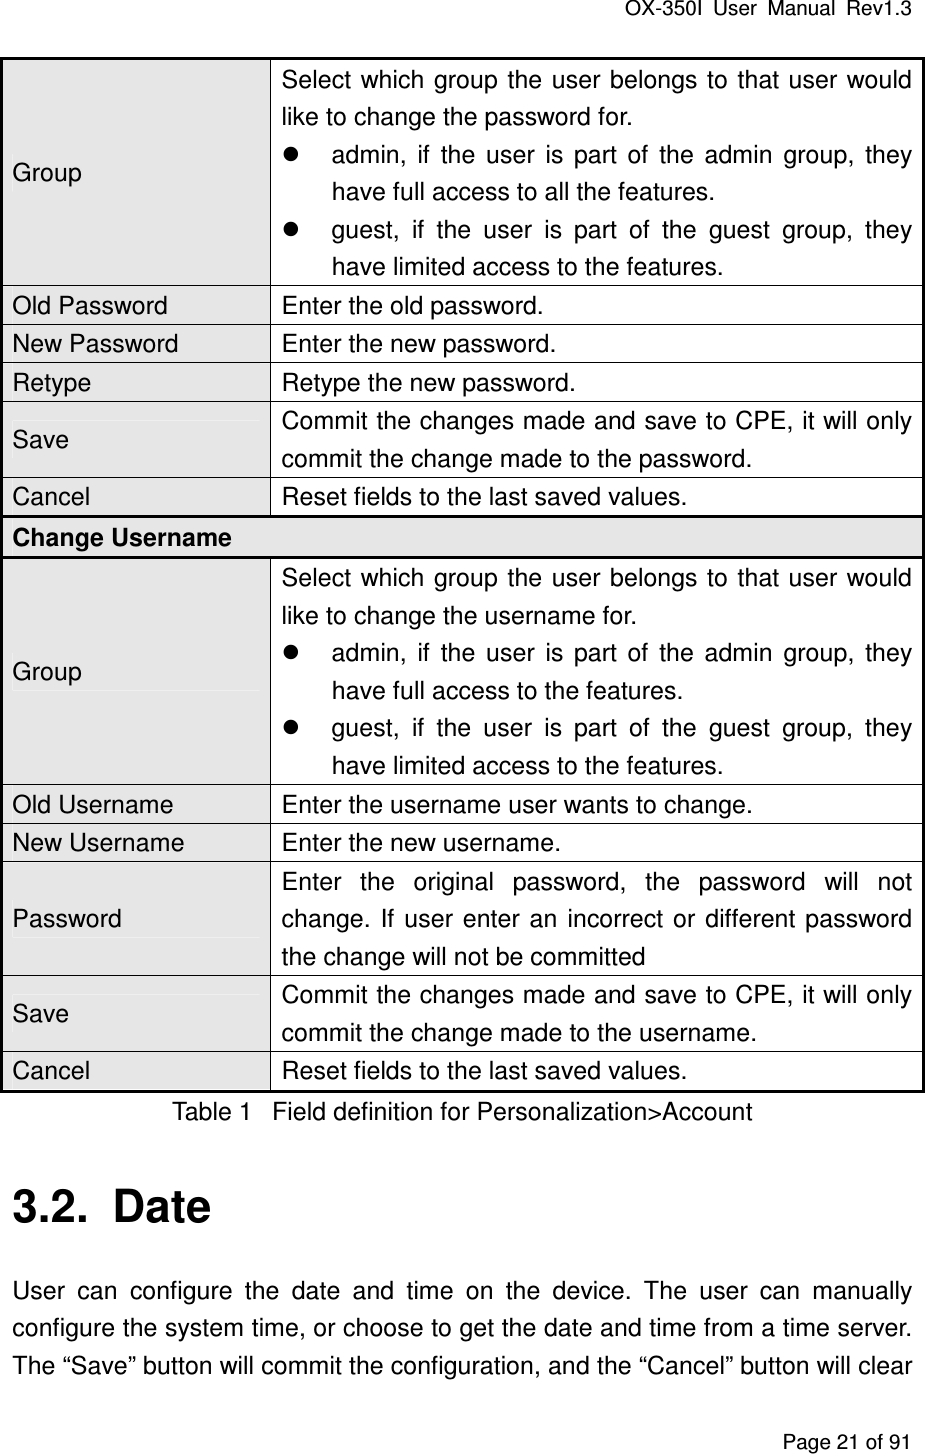 OX-350I  User  Manual  Rev1.3 Page 21 of 91 Group Select which group  the user belongs to that user would like to change the password for.   admin,  if  the  user  is  part  of  the  admin  group,  they have full access to all the features.   guest,  if  the  user  is  part  of  the  guest  group,  they have limited access to the features. Old Password  Enter the old password. New Password  Enter the new password. Retype  Retype the new password. Save  Commit the changes made and save to CPE, it will only commit the change made to the password. Cancel  Reset fields to the last saved values. Change Username Group Select which group  the user belongs to that user would like to change the username for.   admin,  if  the  user  is  part  of  the  admin  group,  they have full access to the features.   guest,  if  the  user  is  part  of  the  guest  group,  they have limited access to the features. Old Username  Enter the username user wants to change. New Username  Enter the new username. Password Enter  the  original  password,  the  password  will  not change.  If  user enter an  incorrect  or  different  password the change will not be committed Save  Commit the changes made and save to CPE, it will only commit the change made to the username. Cancel  Reset fields to the last saved values. Table 1  Field definition for Personalization&gt;Account 3.2.  Date User  can  configure  the  date  and  time  on  the  device.  The  user  can  manually configure the system time, or choose to get the date and time from a time server. The “Save” button will commit the configuration, and the “Cancel” button will clear 